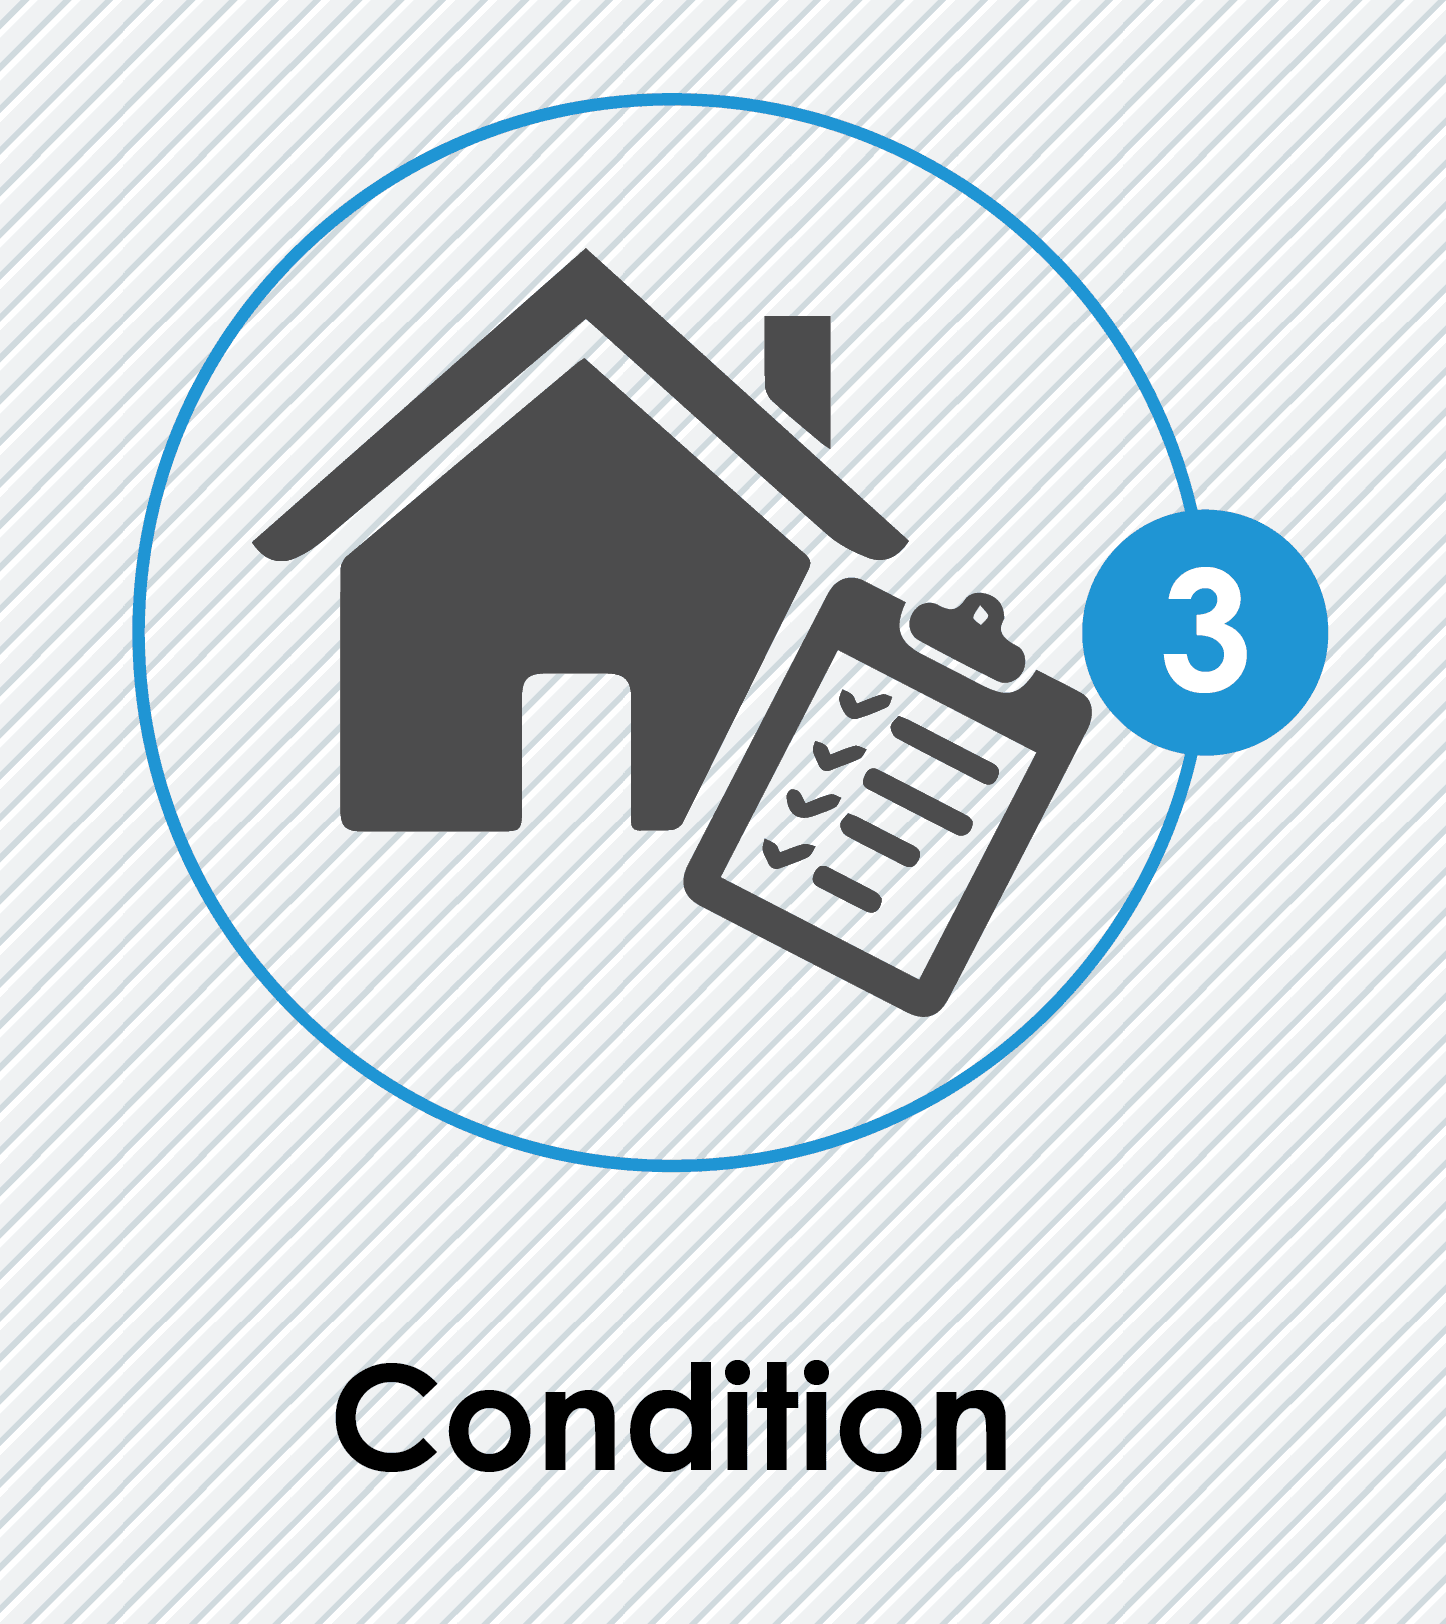 Condition of the home is important when buying